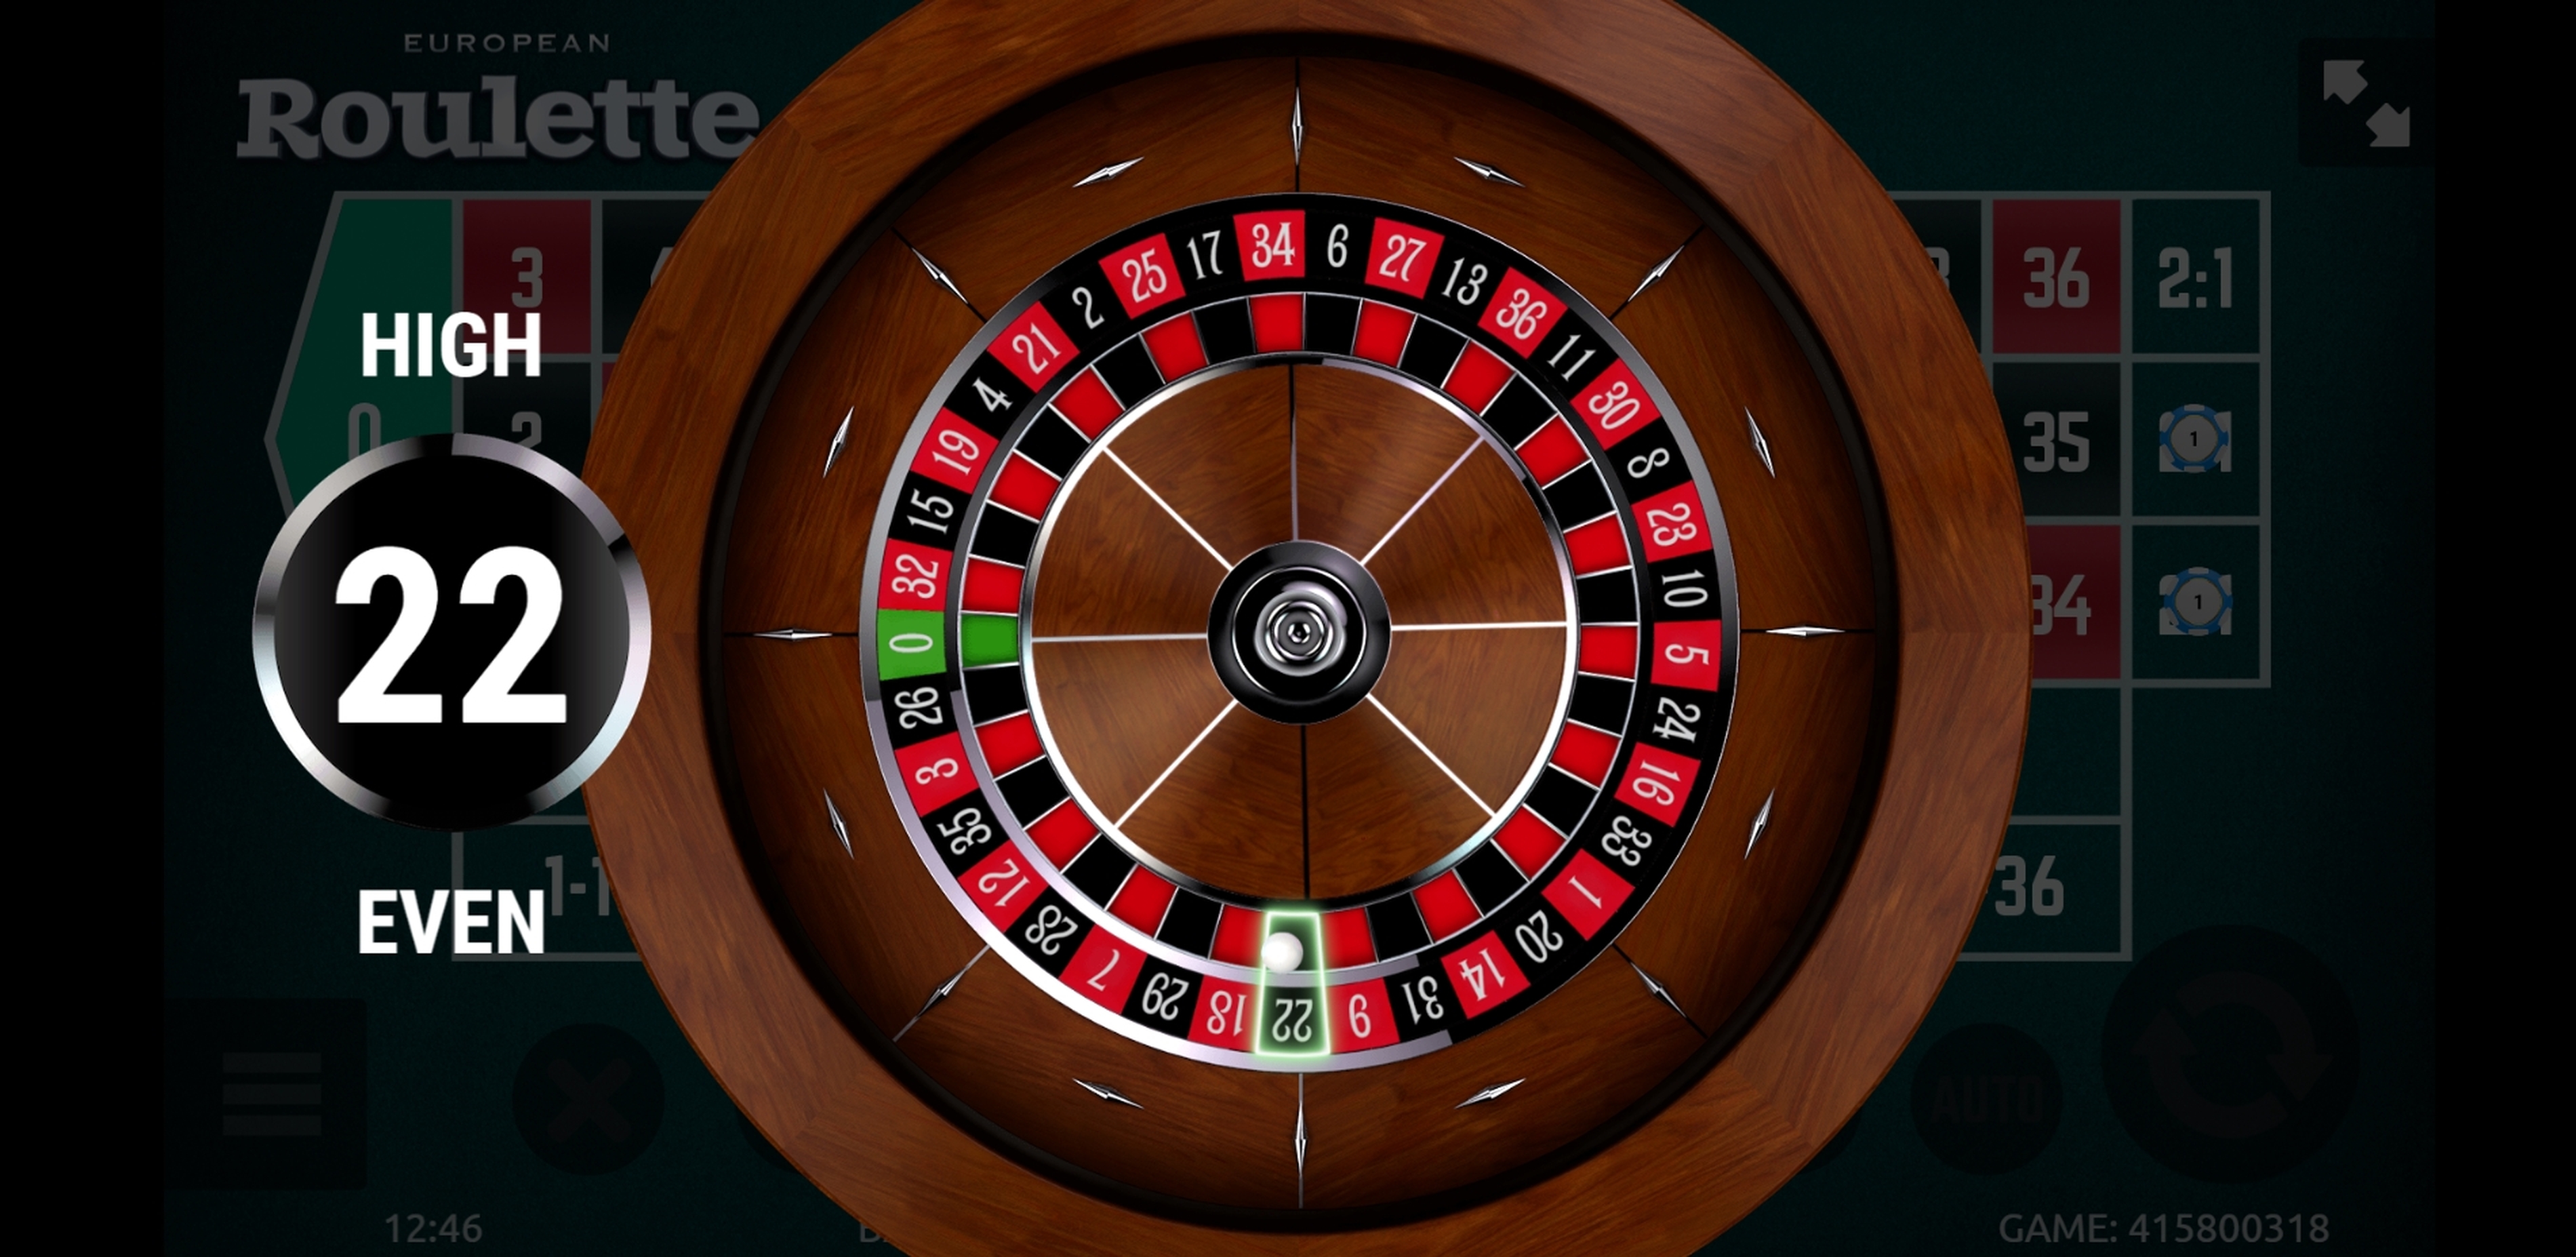 Win Money in European Roulette Free Slot Game by Gamevy